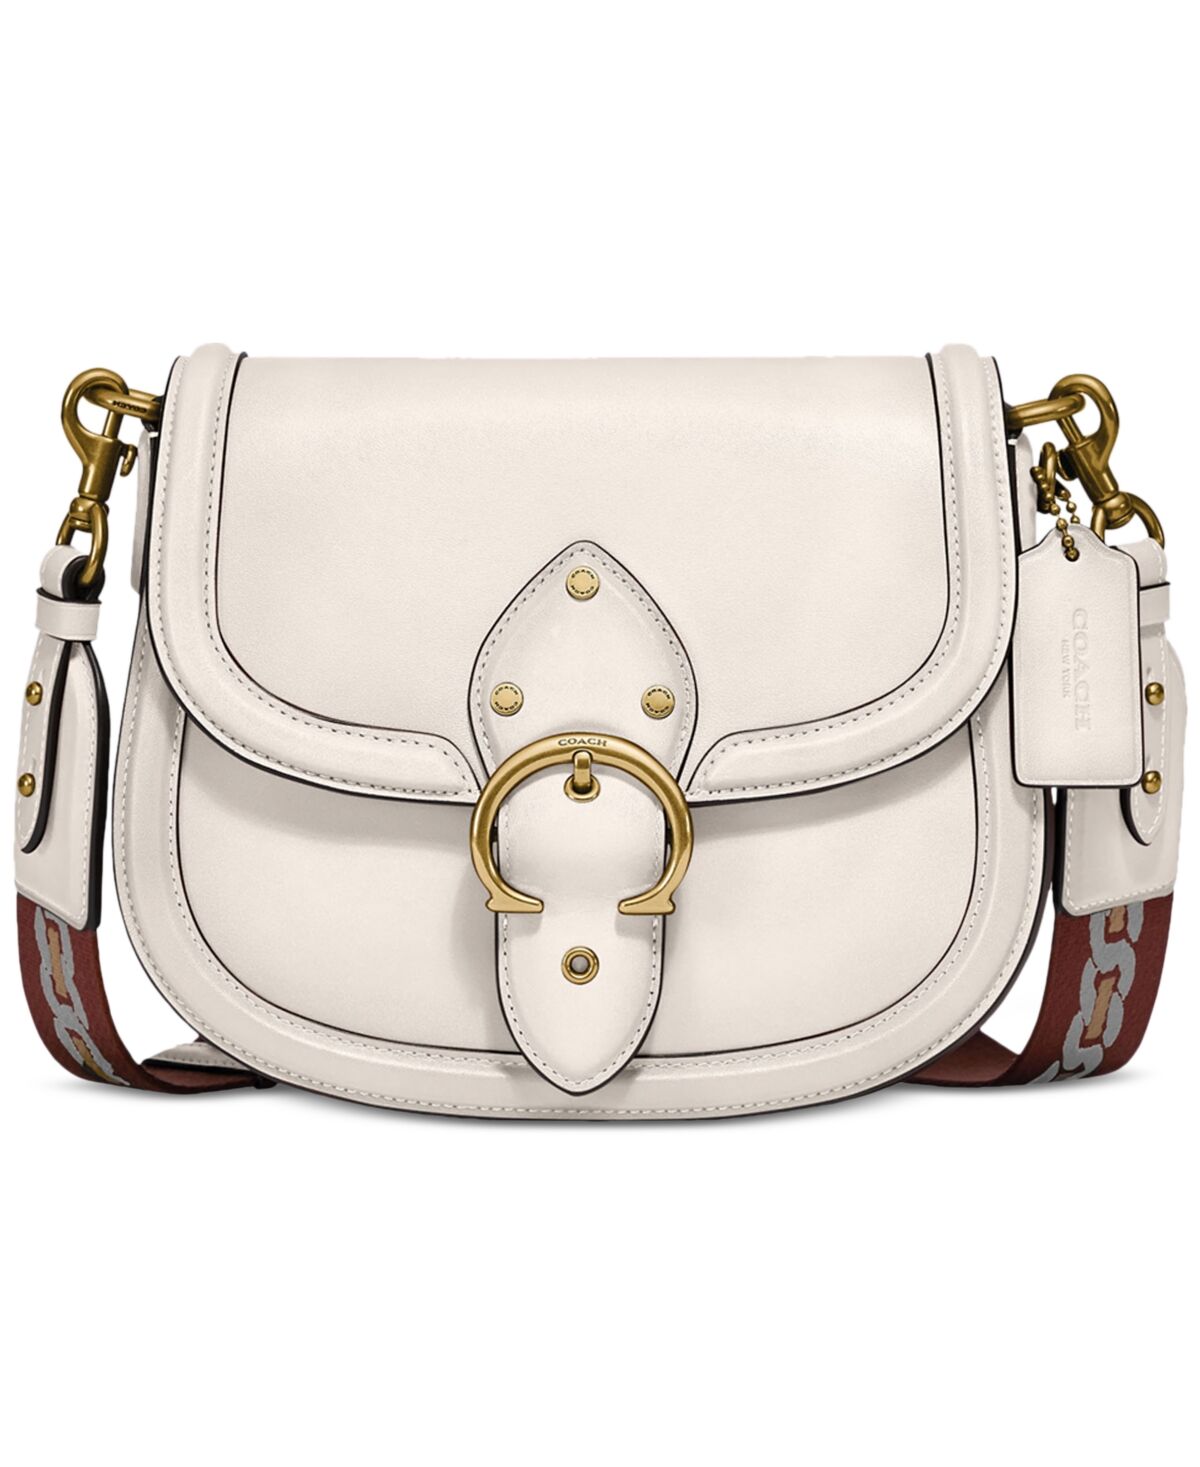 Coach Glovetanned Leather Beat Saddle Bag with Webbing Strap - White